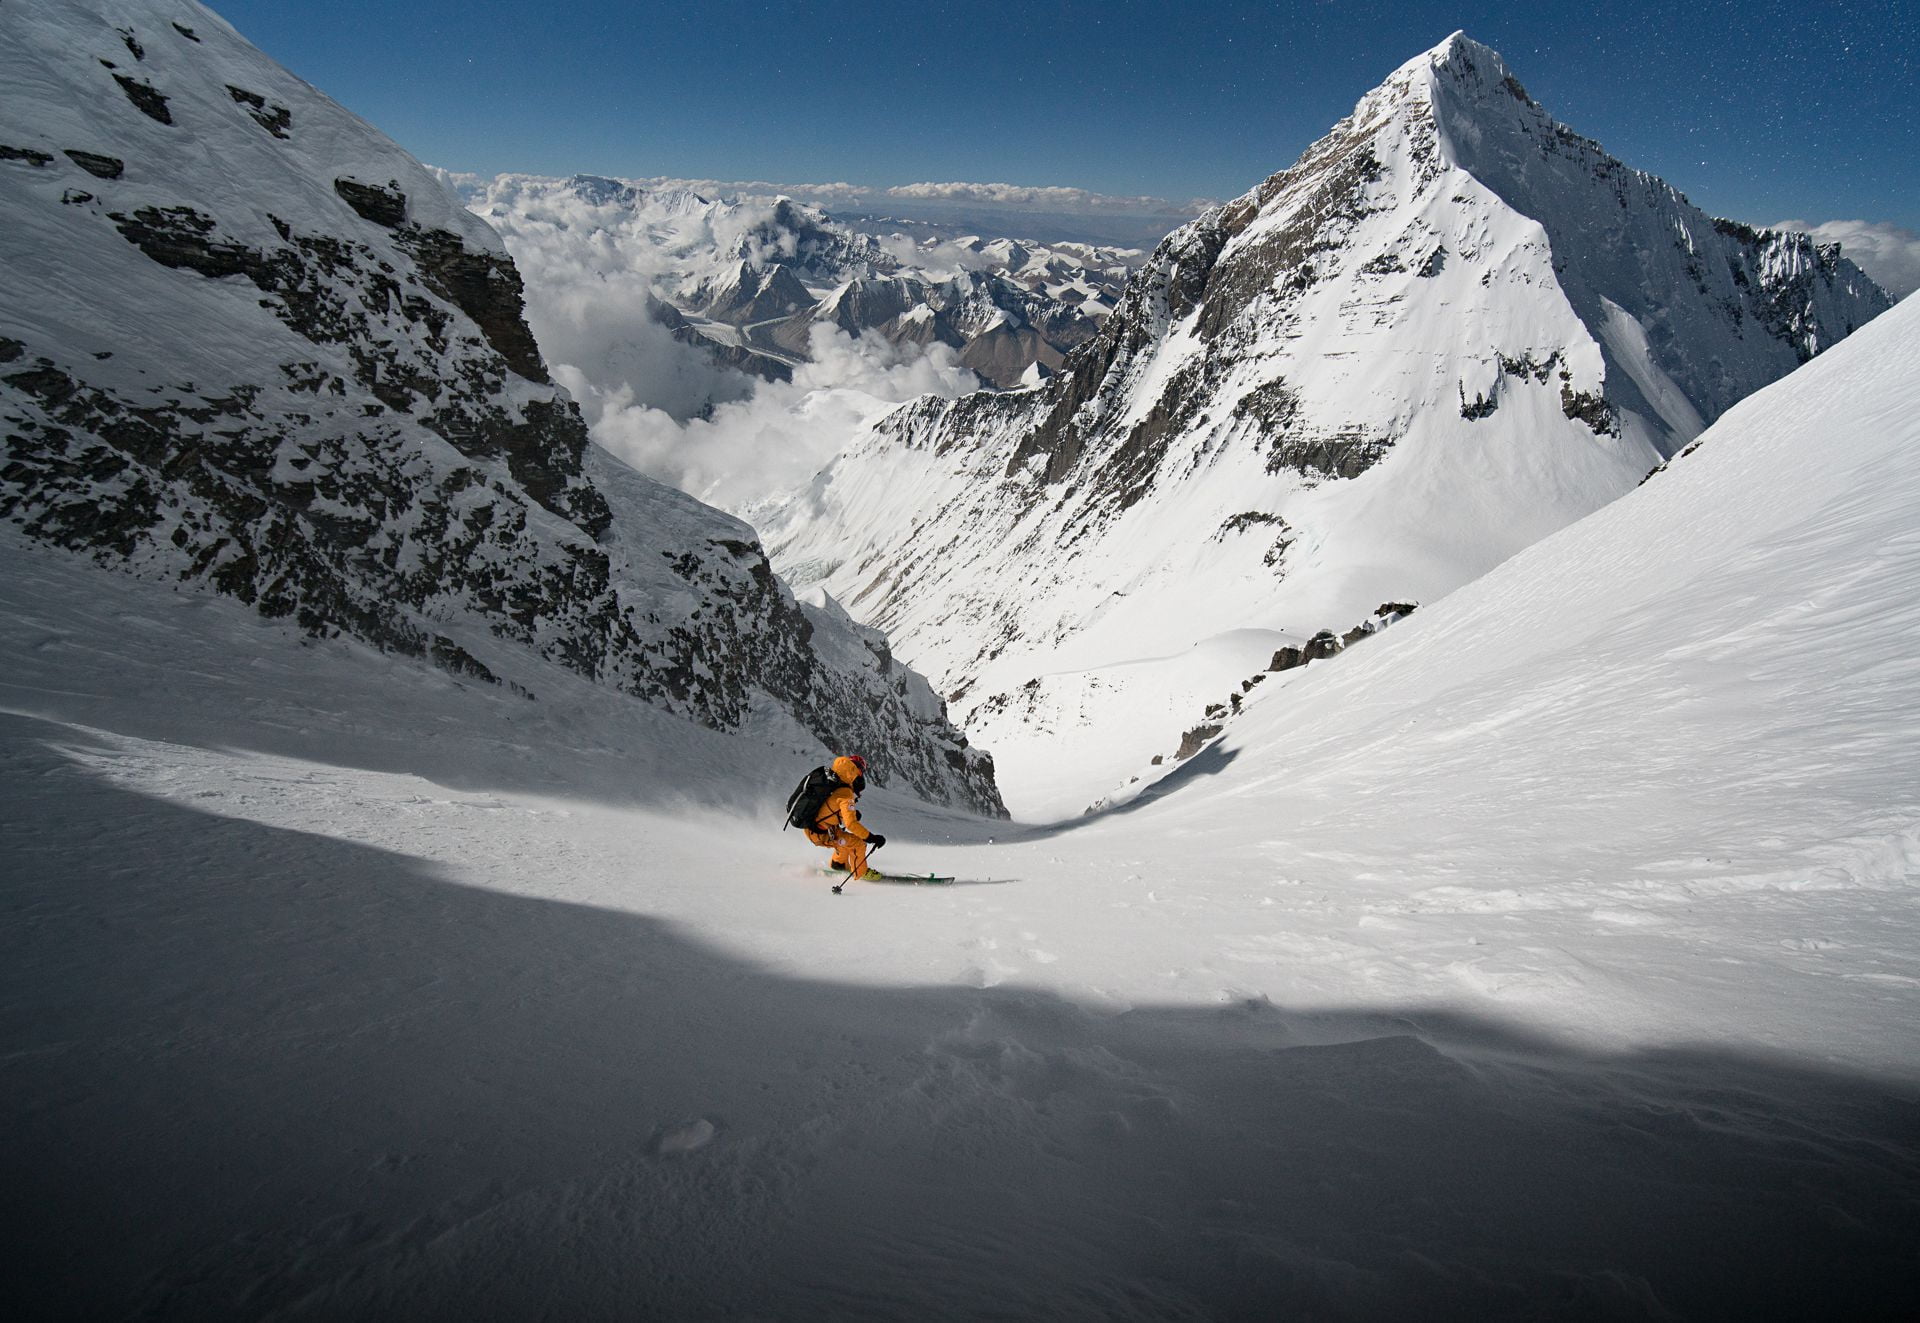 Never-Seen Images from the First Ski Descent of Lhotse